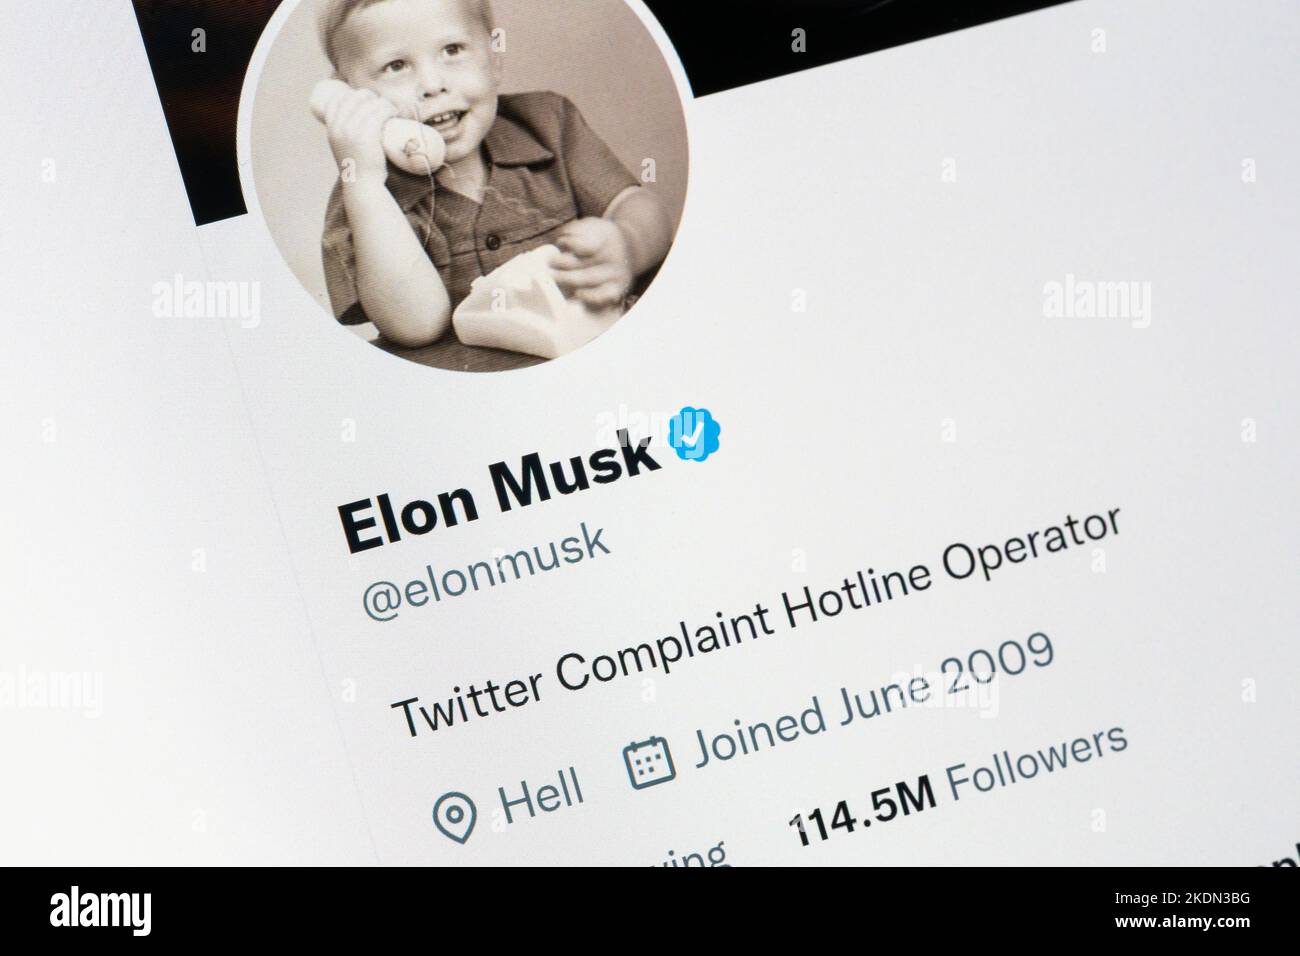 Elon Musk completed his Twitter takeover in November 2022, commenced with mass staff layoffs and named himself Twitter Complaint Hotline Operator Stock Photo